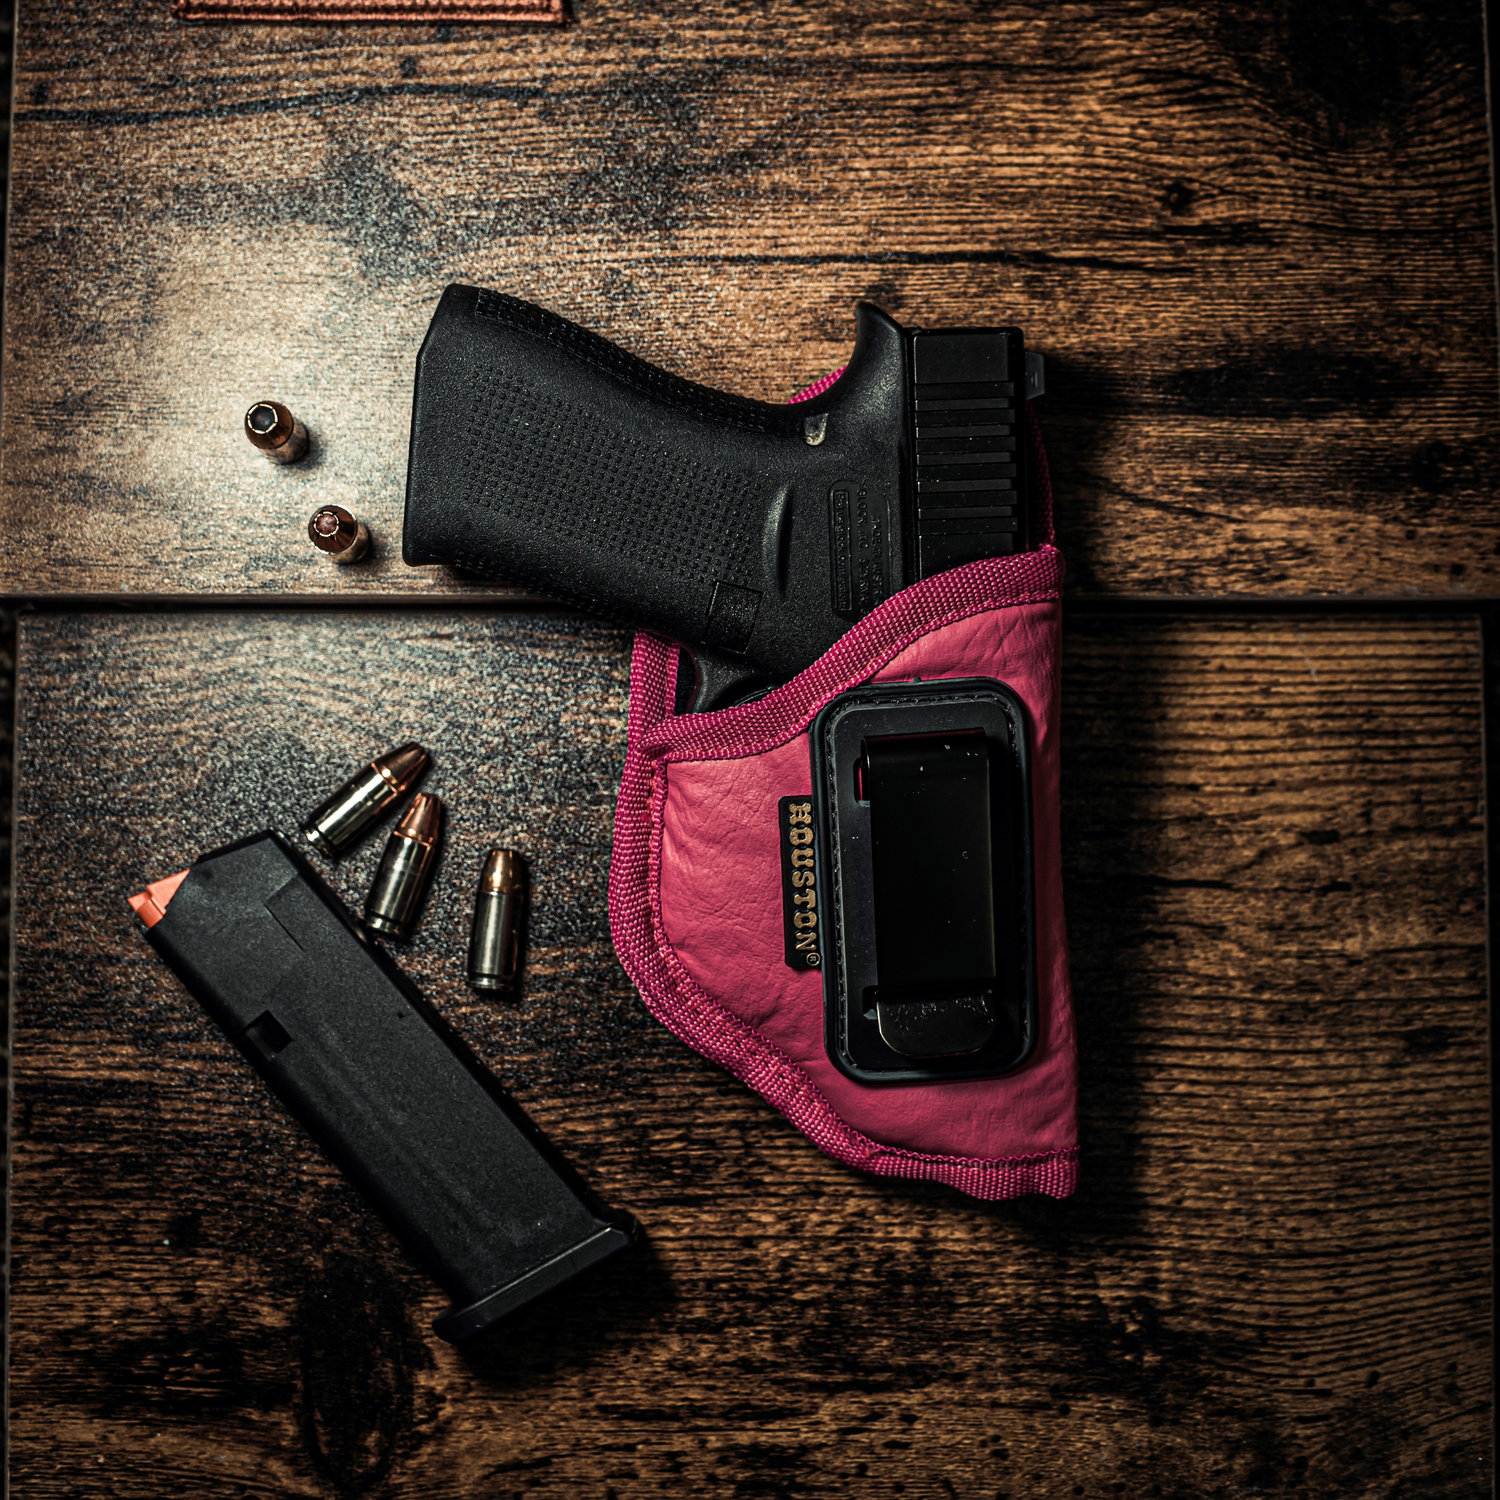 ECO-LEATHER- IWH Dual Clip w/ Mag Holder - Holster – Houston Gun Holsters,  LLC